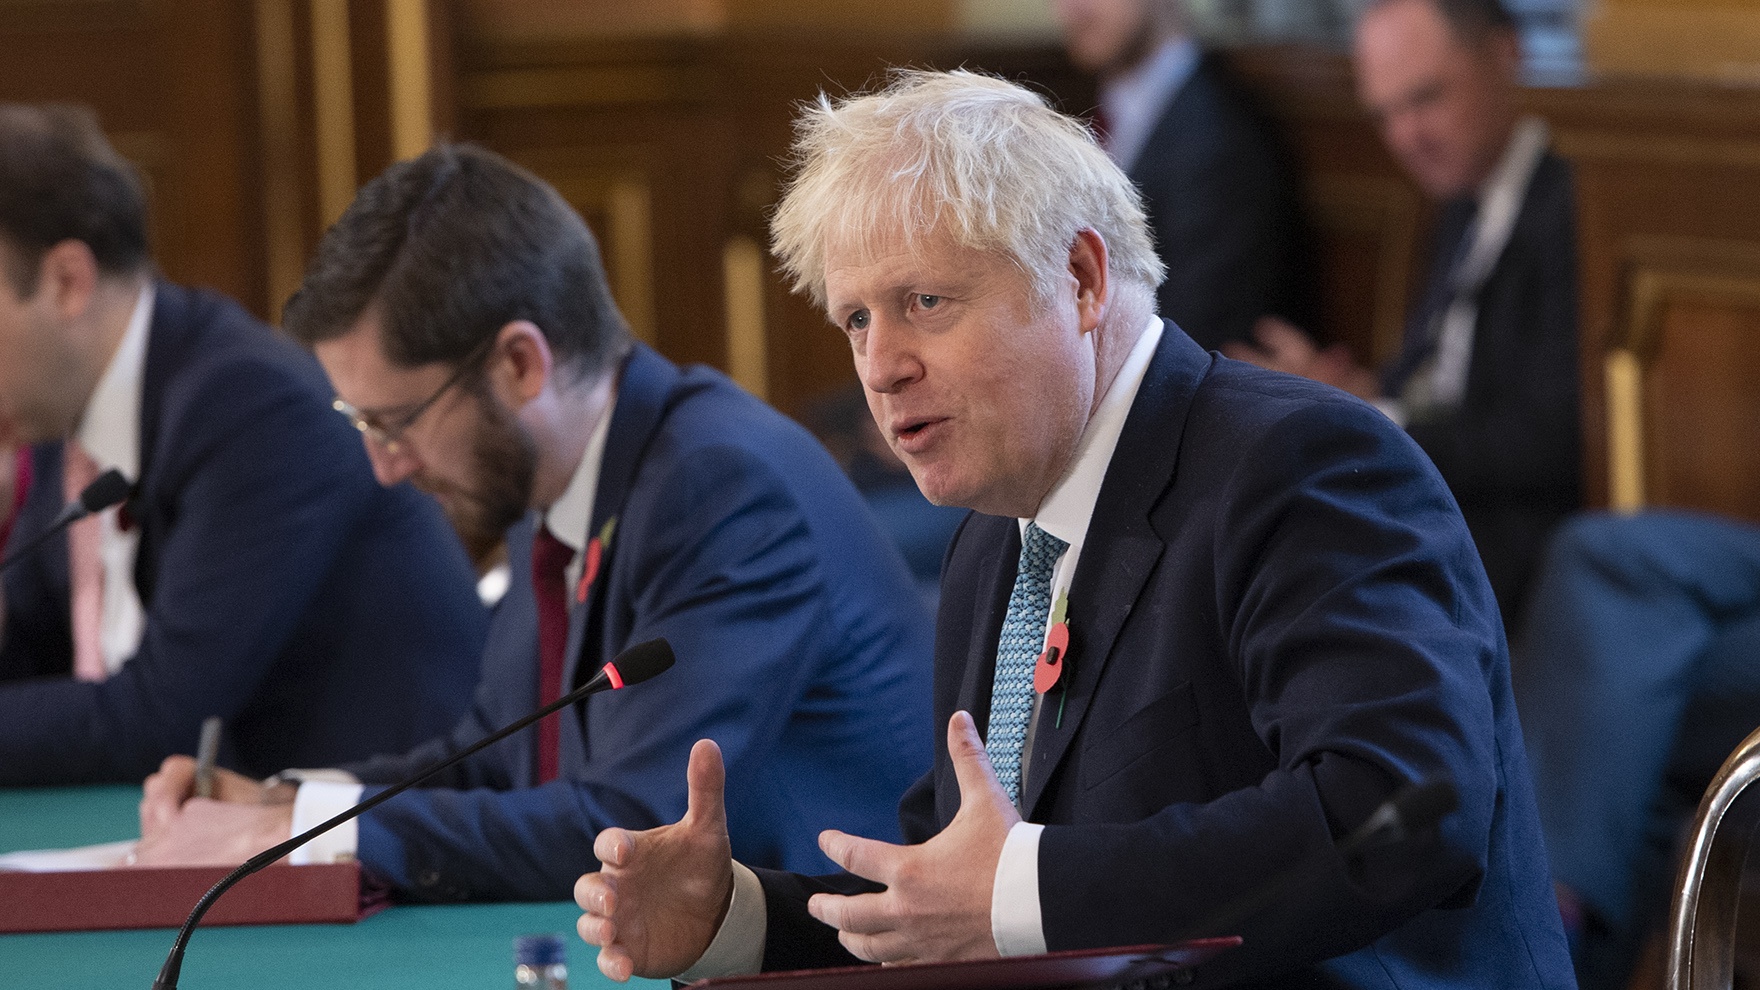 Boris Johnson chairs the weekly cabinet meeting at the Foreign, Commonwealth and Development Office.